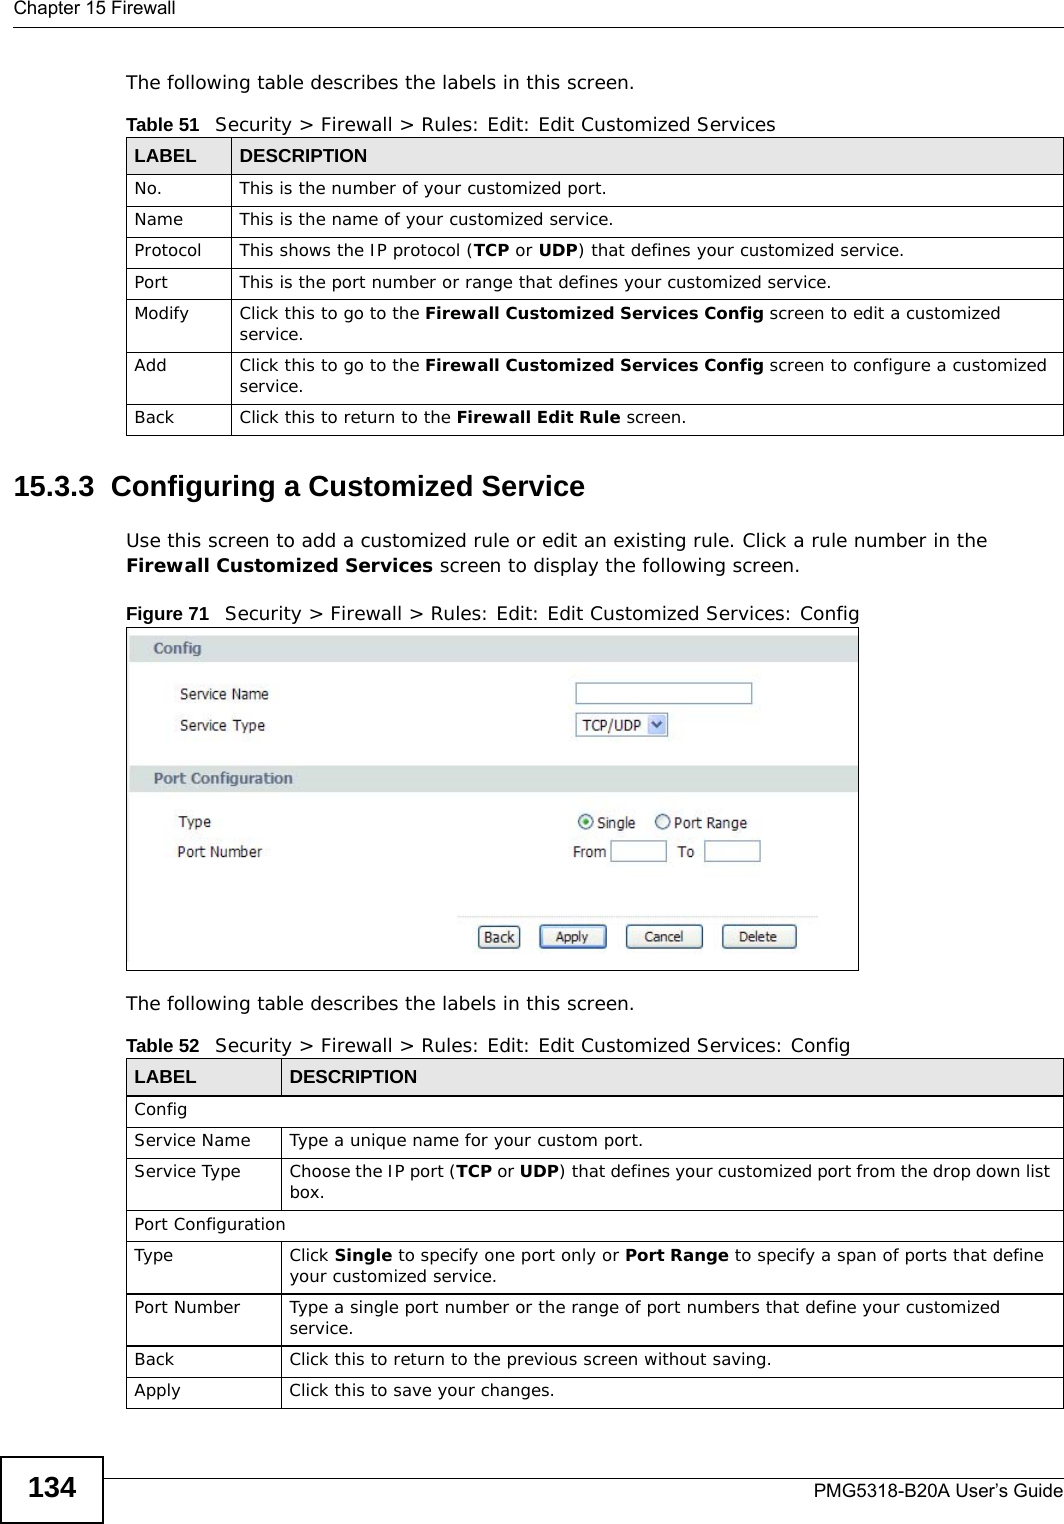 Chapter 15 FirewallPMG5318-B20A User’s Guide134The following table describes the labels in this screen.  15.3.3  Configuring a Customized Service Use this screen to add a customized rule or edit an existing rule. Click a rule number in the Firewall Customized Services screen to display the following screen.Figure 71   Security &gt; Firewall &gt; Rules: Edit: Edit Customized Services: ConfigThe following table describes the labels in this screen.Table 51   Security &gt; Firewall &gt; Rules: Edit: Edit Customized ServicesLABEL DESCRIPTIONNo. This is the number of your customized port. Name This is the name of your customized service.Protocol This shows the IP protocol (TCP or UDP) that defines your customized service.Port This is the port number or range that defines your customized service.Modify Click this to go to the Firewall Customized Services Config screen to edit a customized service.Add Click this to go to the Firewall Customized Services Config screen to configure a customized service.Back Click this to return to the Firewall Edit Rule screen.Table 52   Security &gt; Firewall &gt; Rules: Edit: Edit Customized Services: ConfigLABEL DESCRIPTIONConfigService Name Type a unique name for your custom port.Service Type Choose the IP port (TCP or UDP) that defines your customized port from the drop down list box.Port ConfigurationType Click Single to specify one port only or Port Range to specify a span of ports that define your customized service. Port Number Type a single port number or the range of port numbers that define your customized service.Back Click this to return to the previous screen without saving.Apply Click this to save your changes.